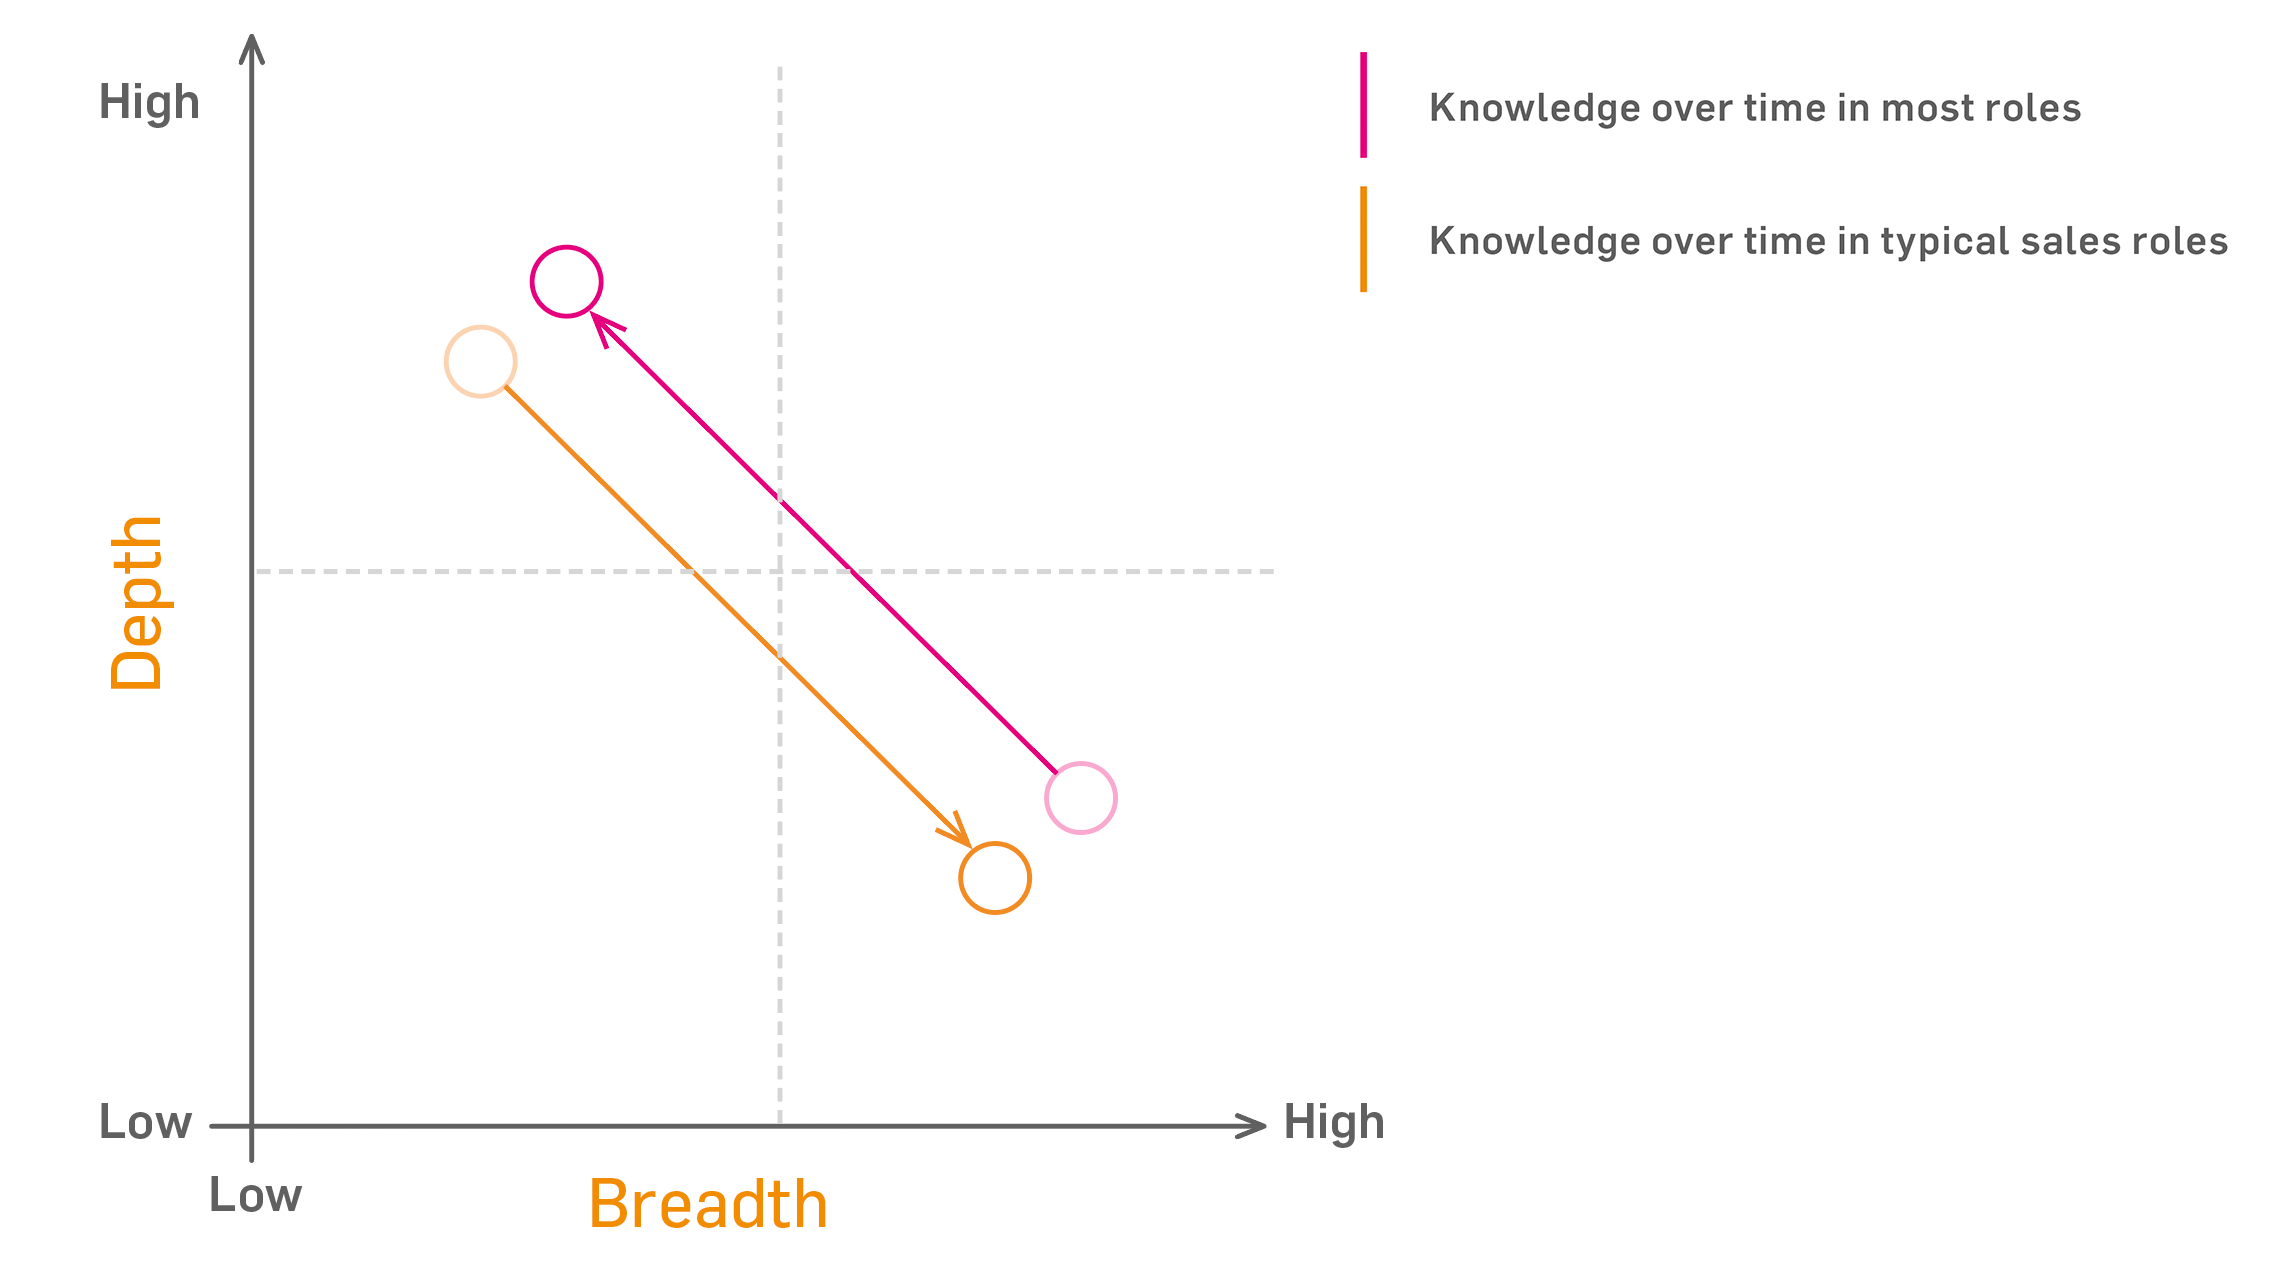 A graph presenting a comparison about how knowledge transitions over time in most roles compared to sales roles